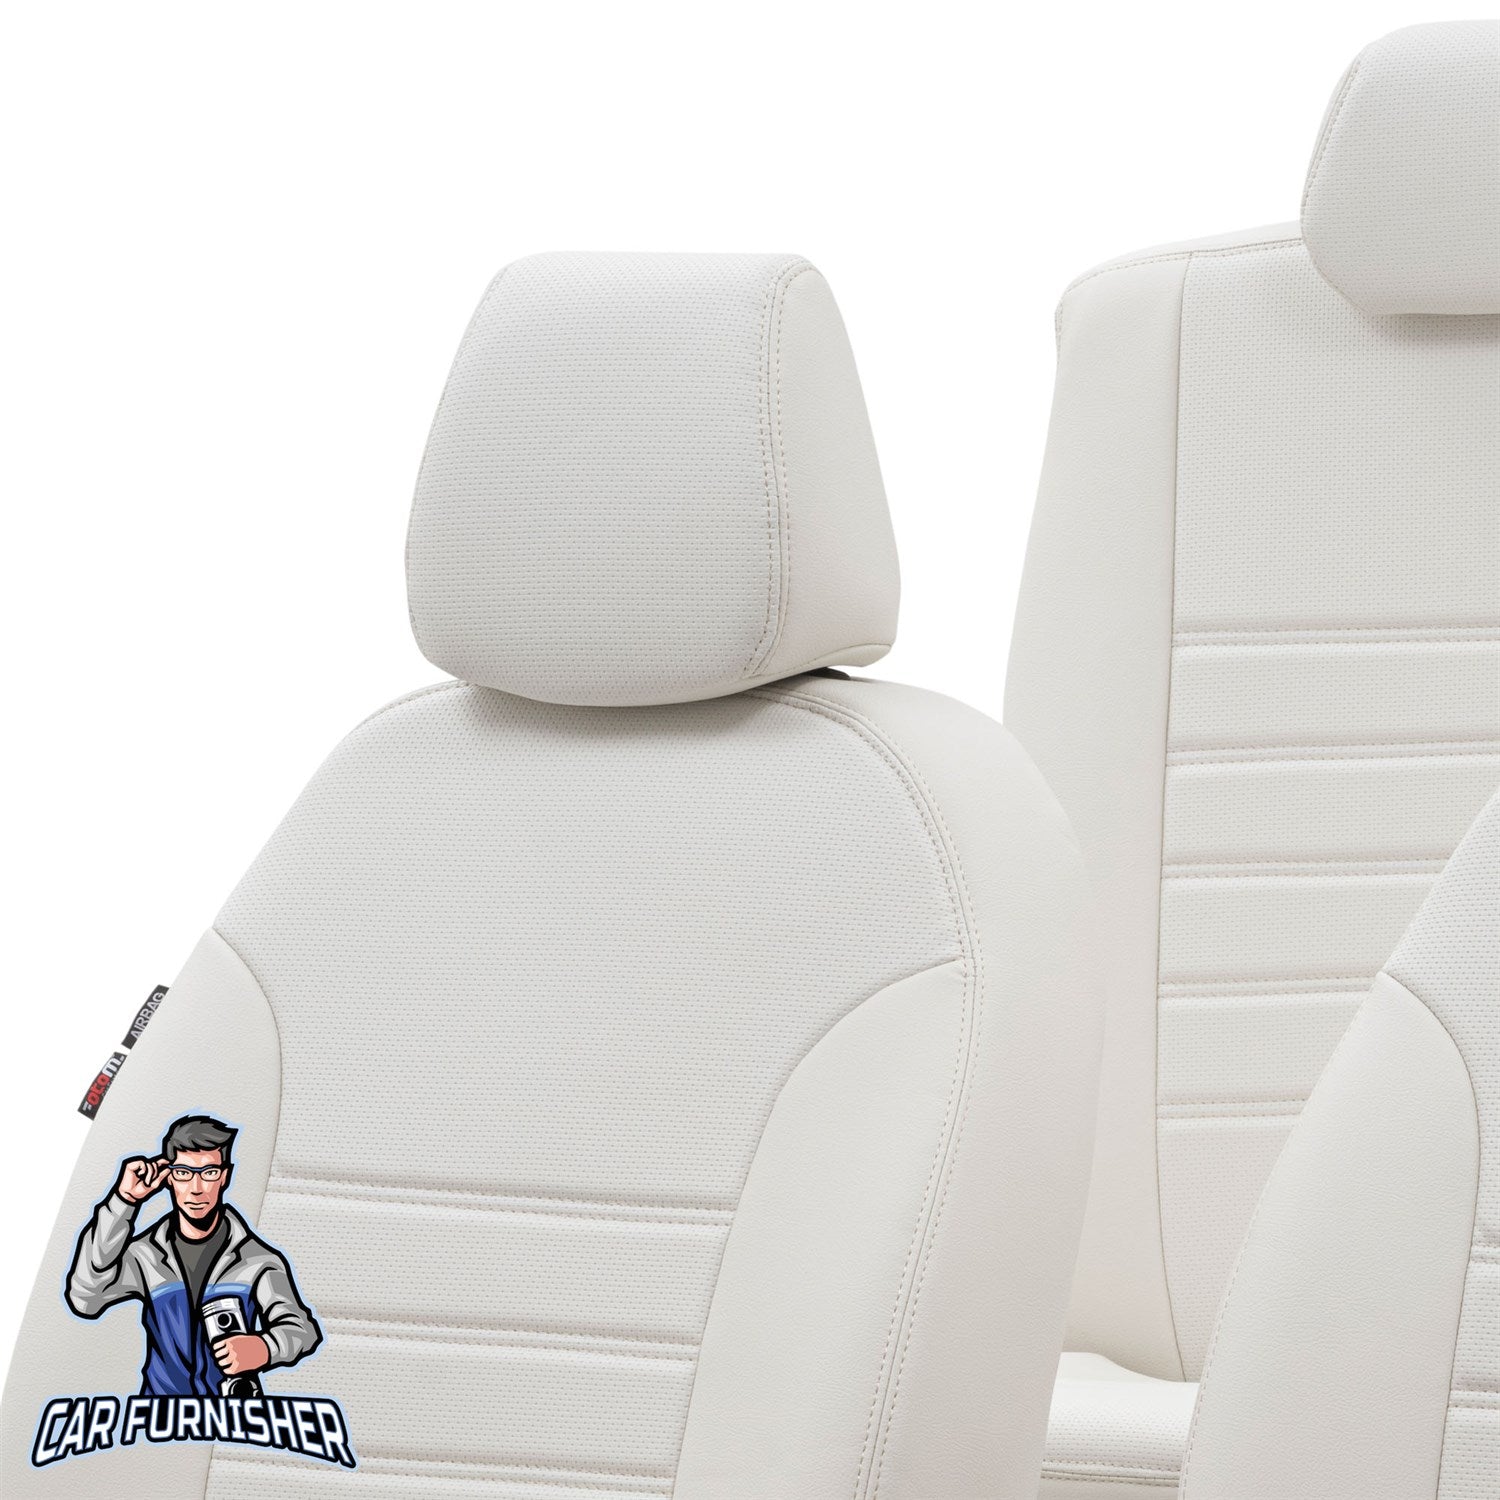 Volvo S60 Car Seat Cover 2000-2018 T4/T5/T6/T8/D5 New York Design Ivory Full Set (5 Seats + Handrest) Leather & Fabric